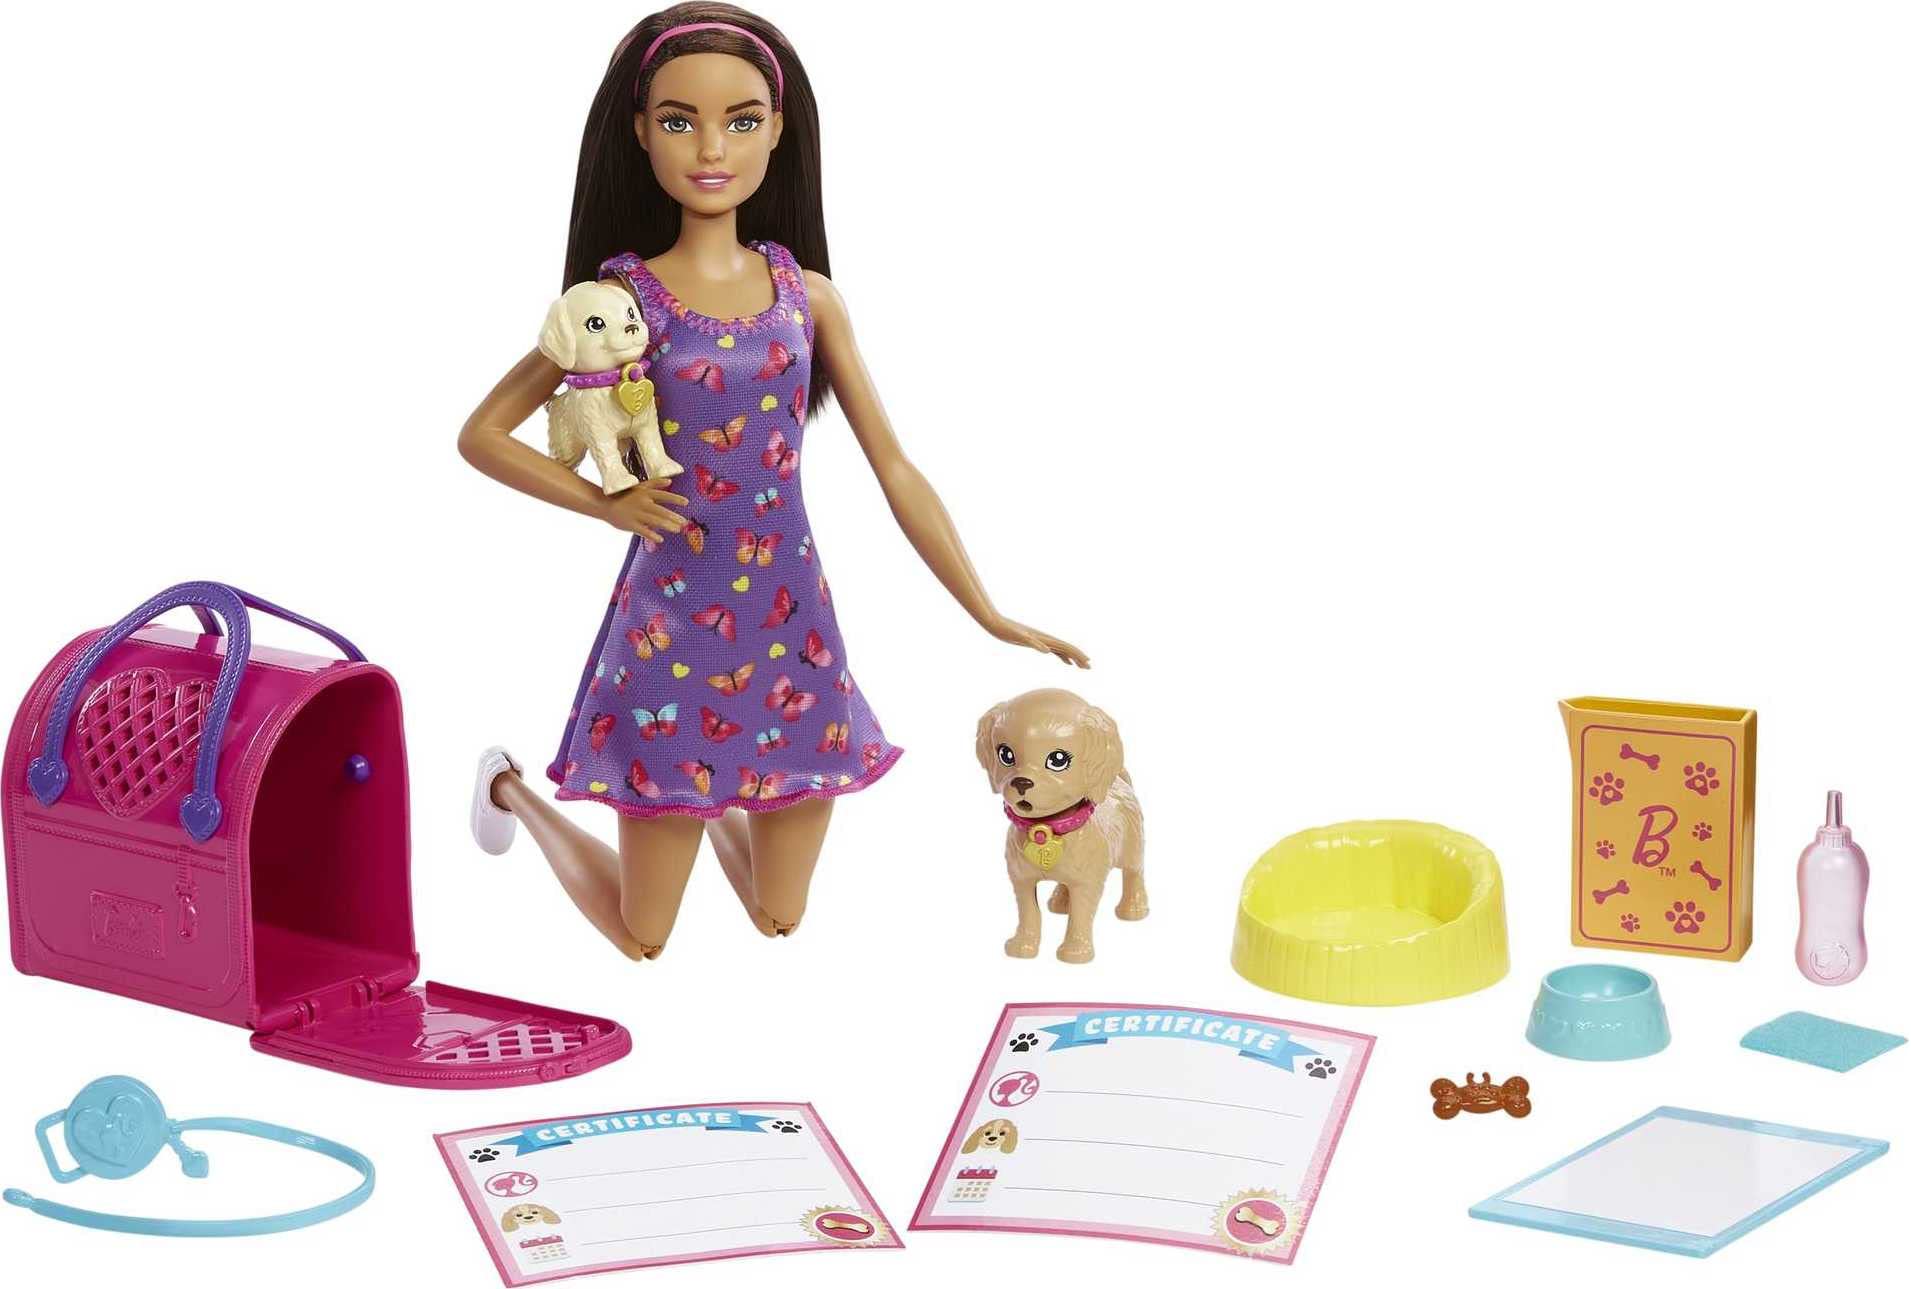 Barbie Pup Adoption Doll & Accessories Set with Color-Change, 2 Pets, Carrier & 10 Accessories, Brunette Doll in Purple Dress